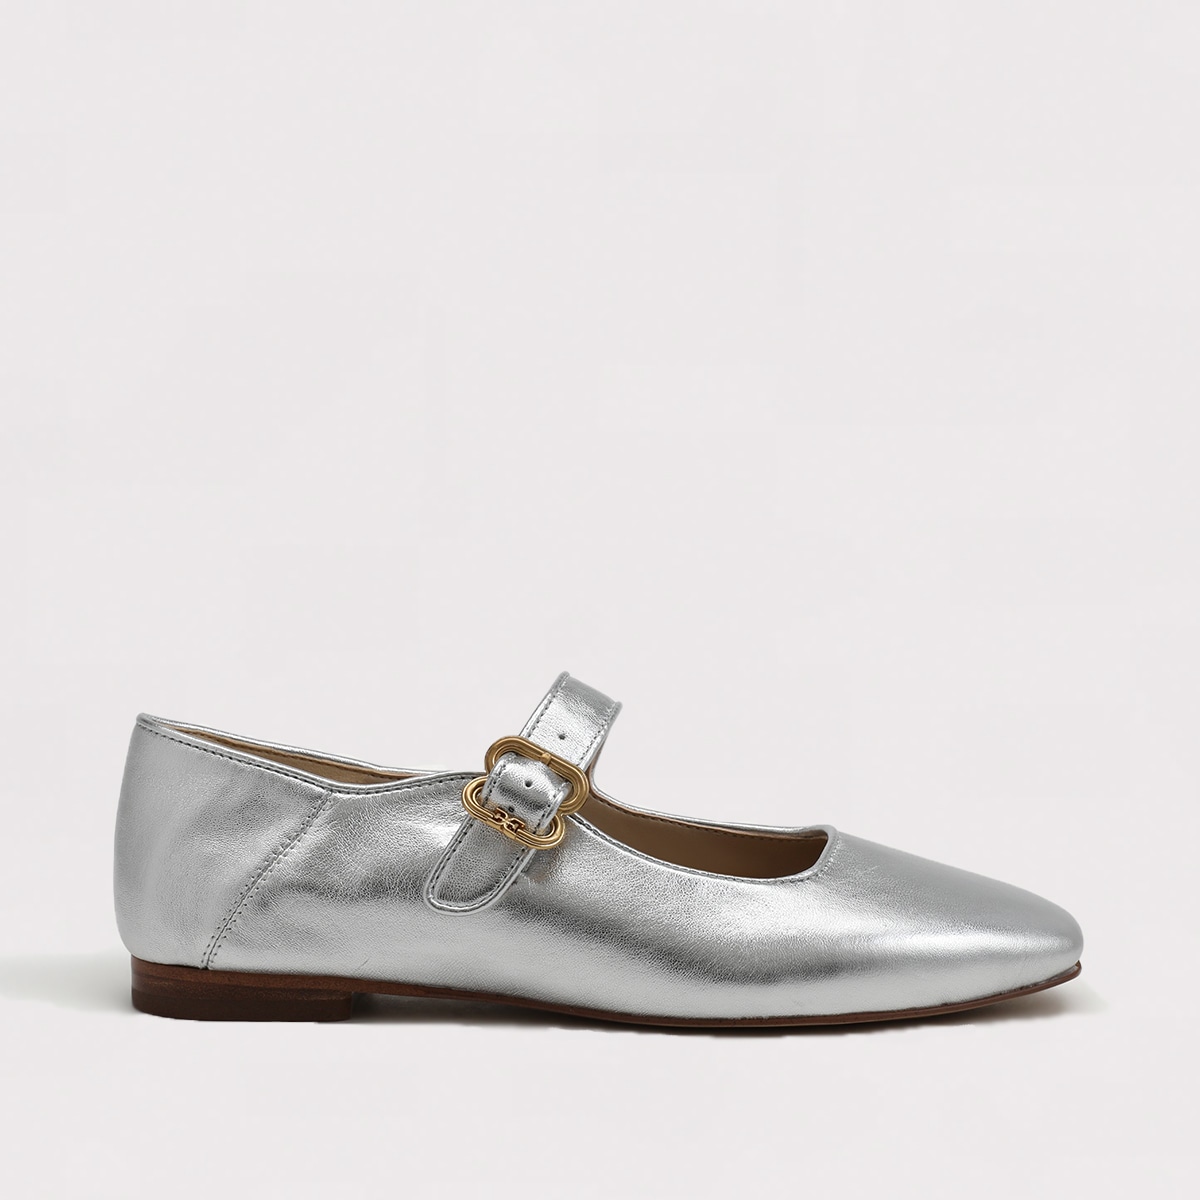 Shop mary janes from Sam Edelman